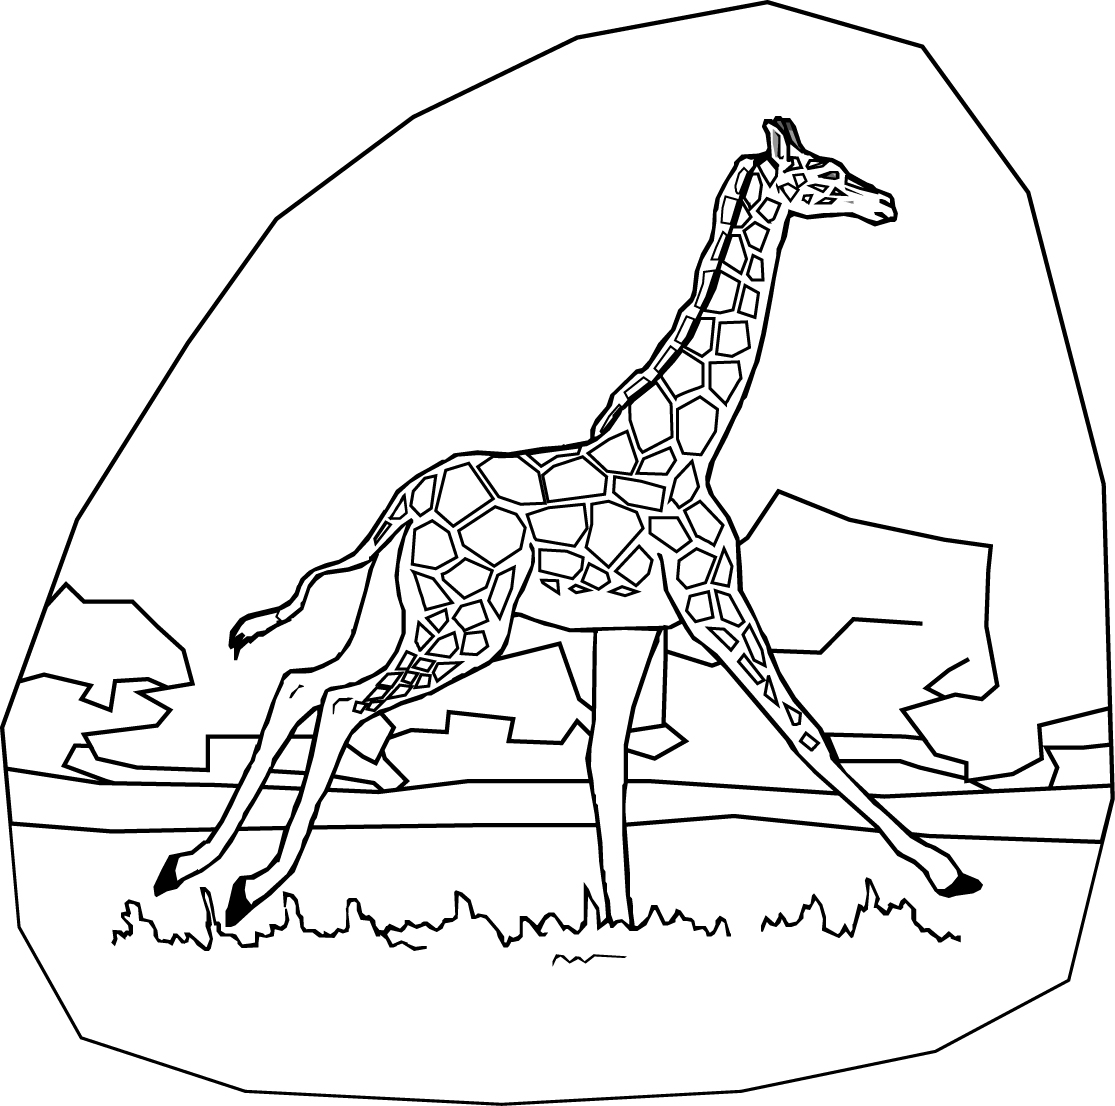 Coloring Pages for Kids: Giraffe Coloring Pages for Kids